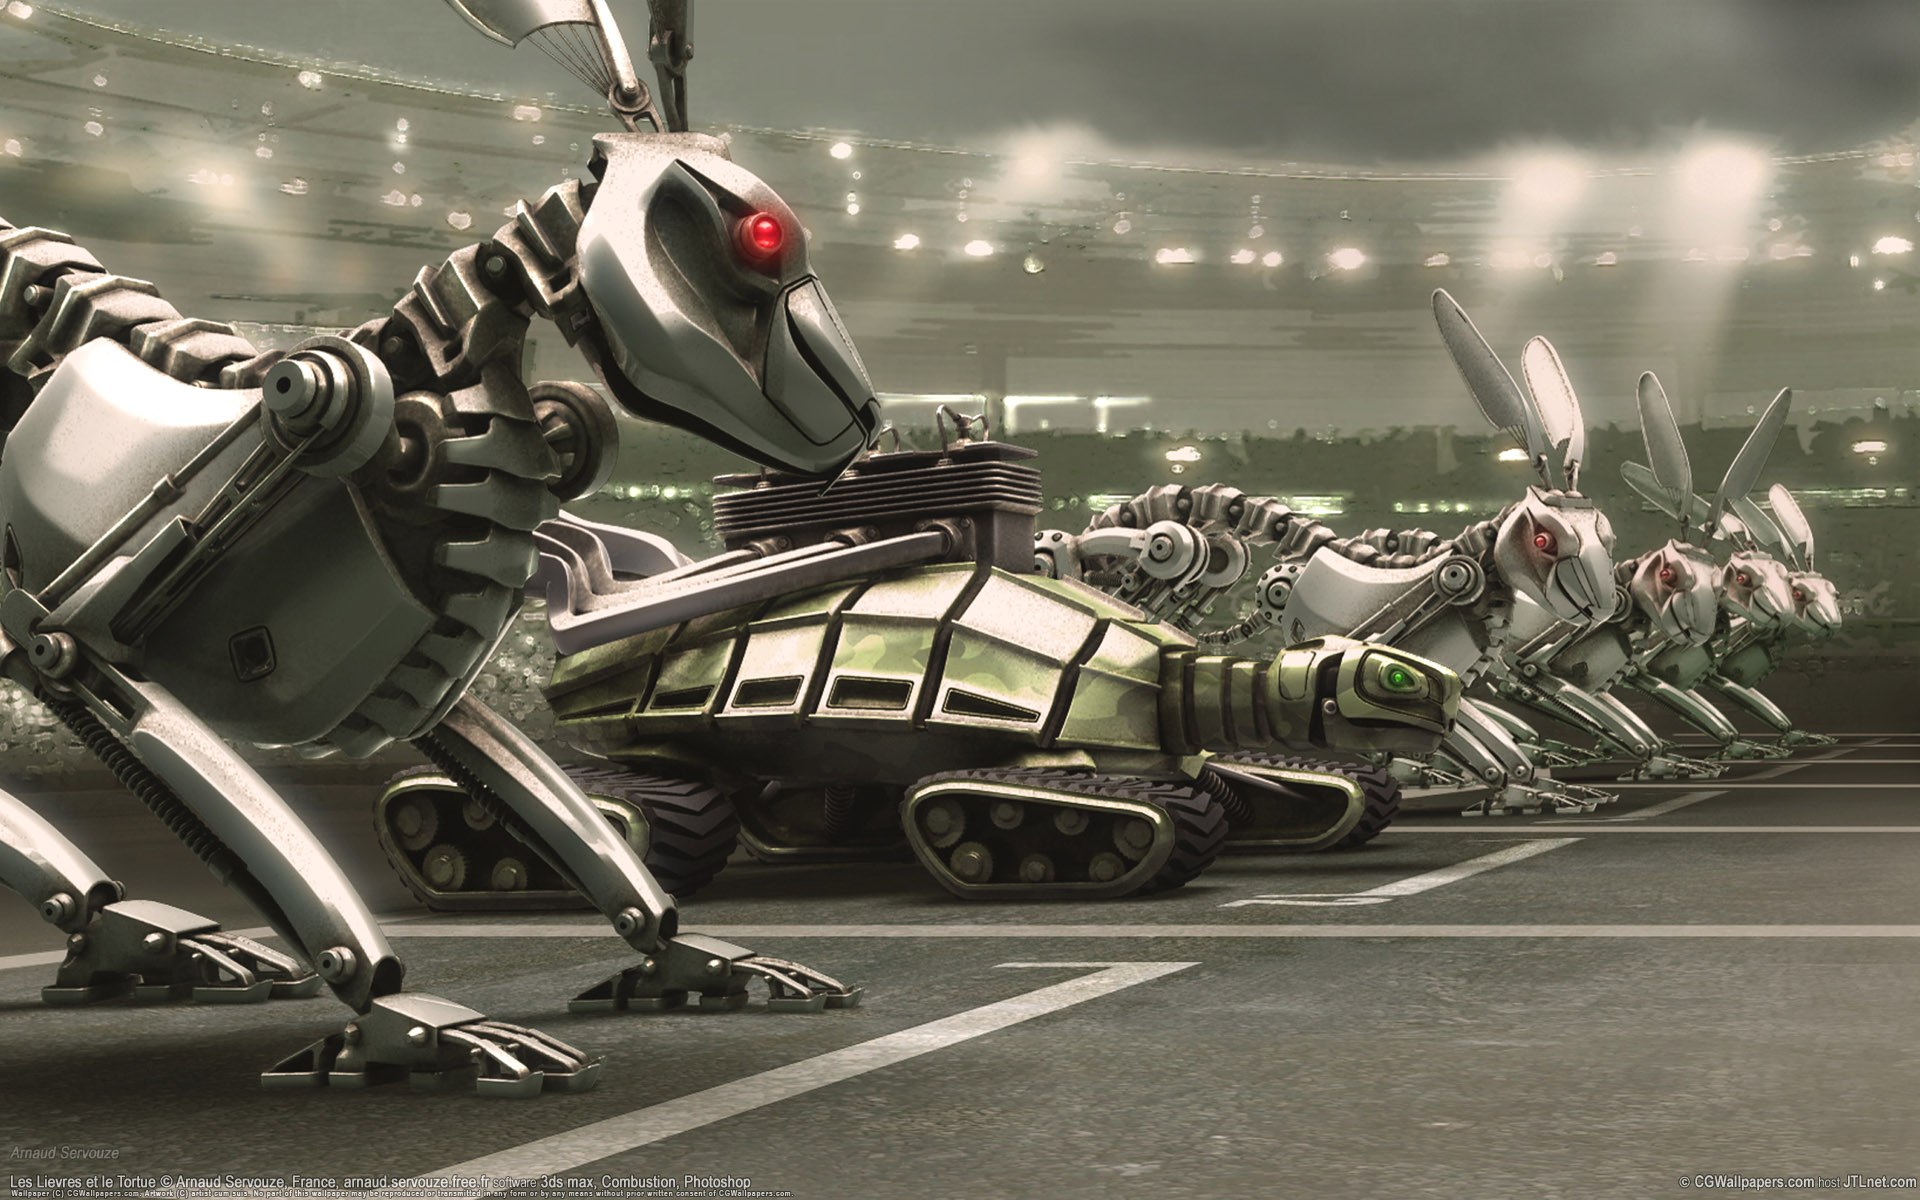 Robot sprint wallpaper 1920x1200 - - High Quality and other